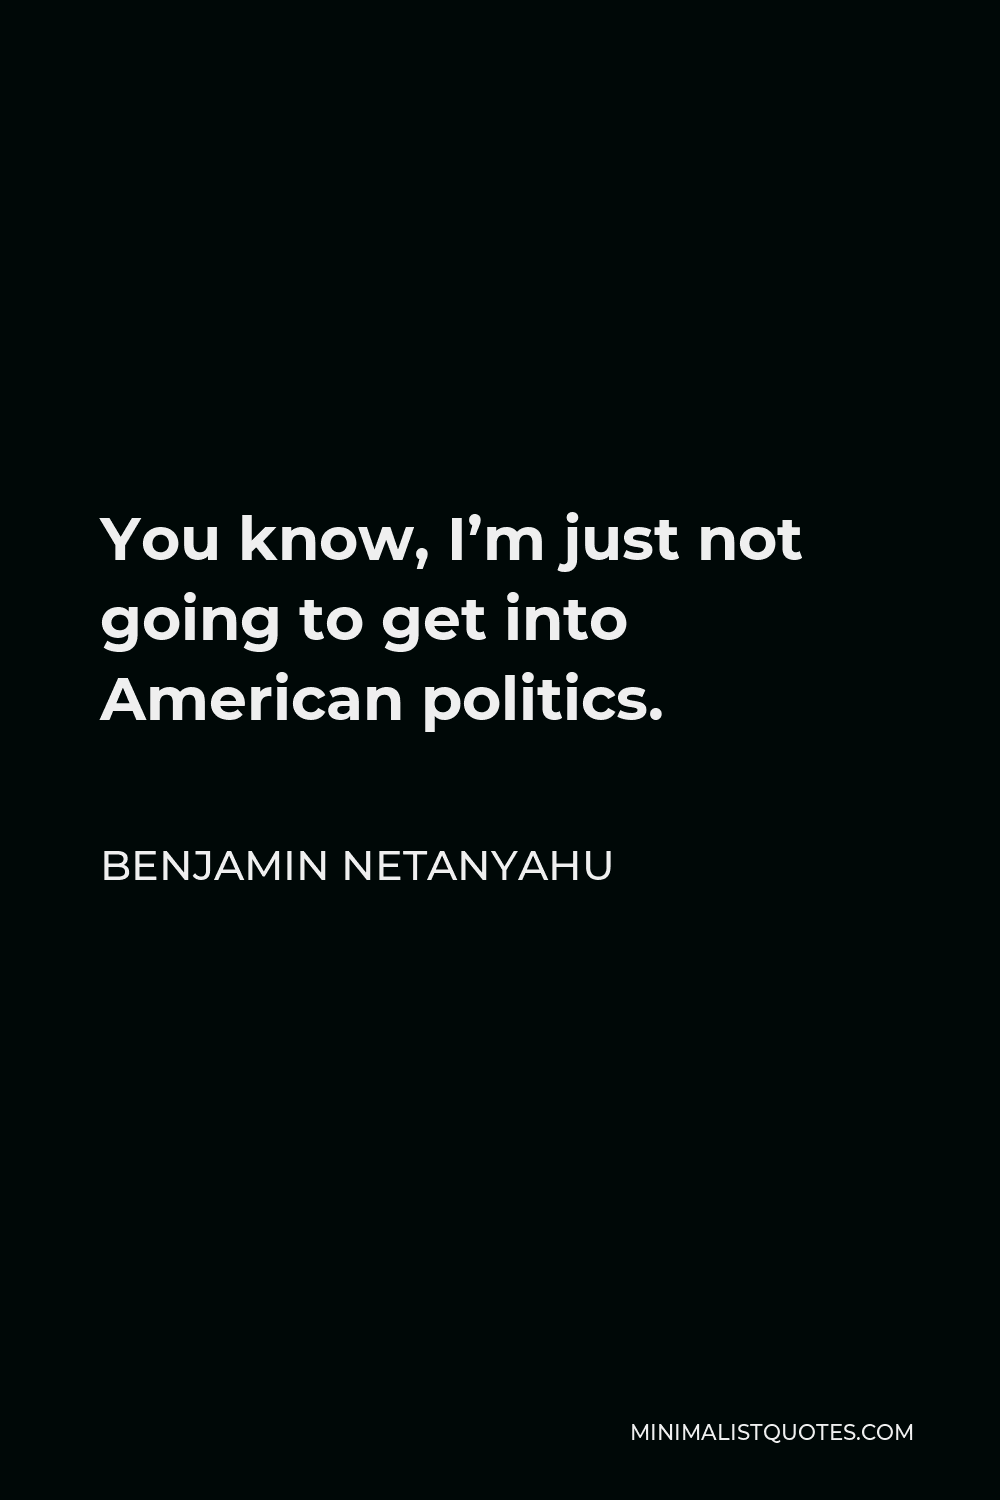 Benjamin Netanyahu Quote - You know, I’m just not going to get into American politics.